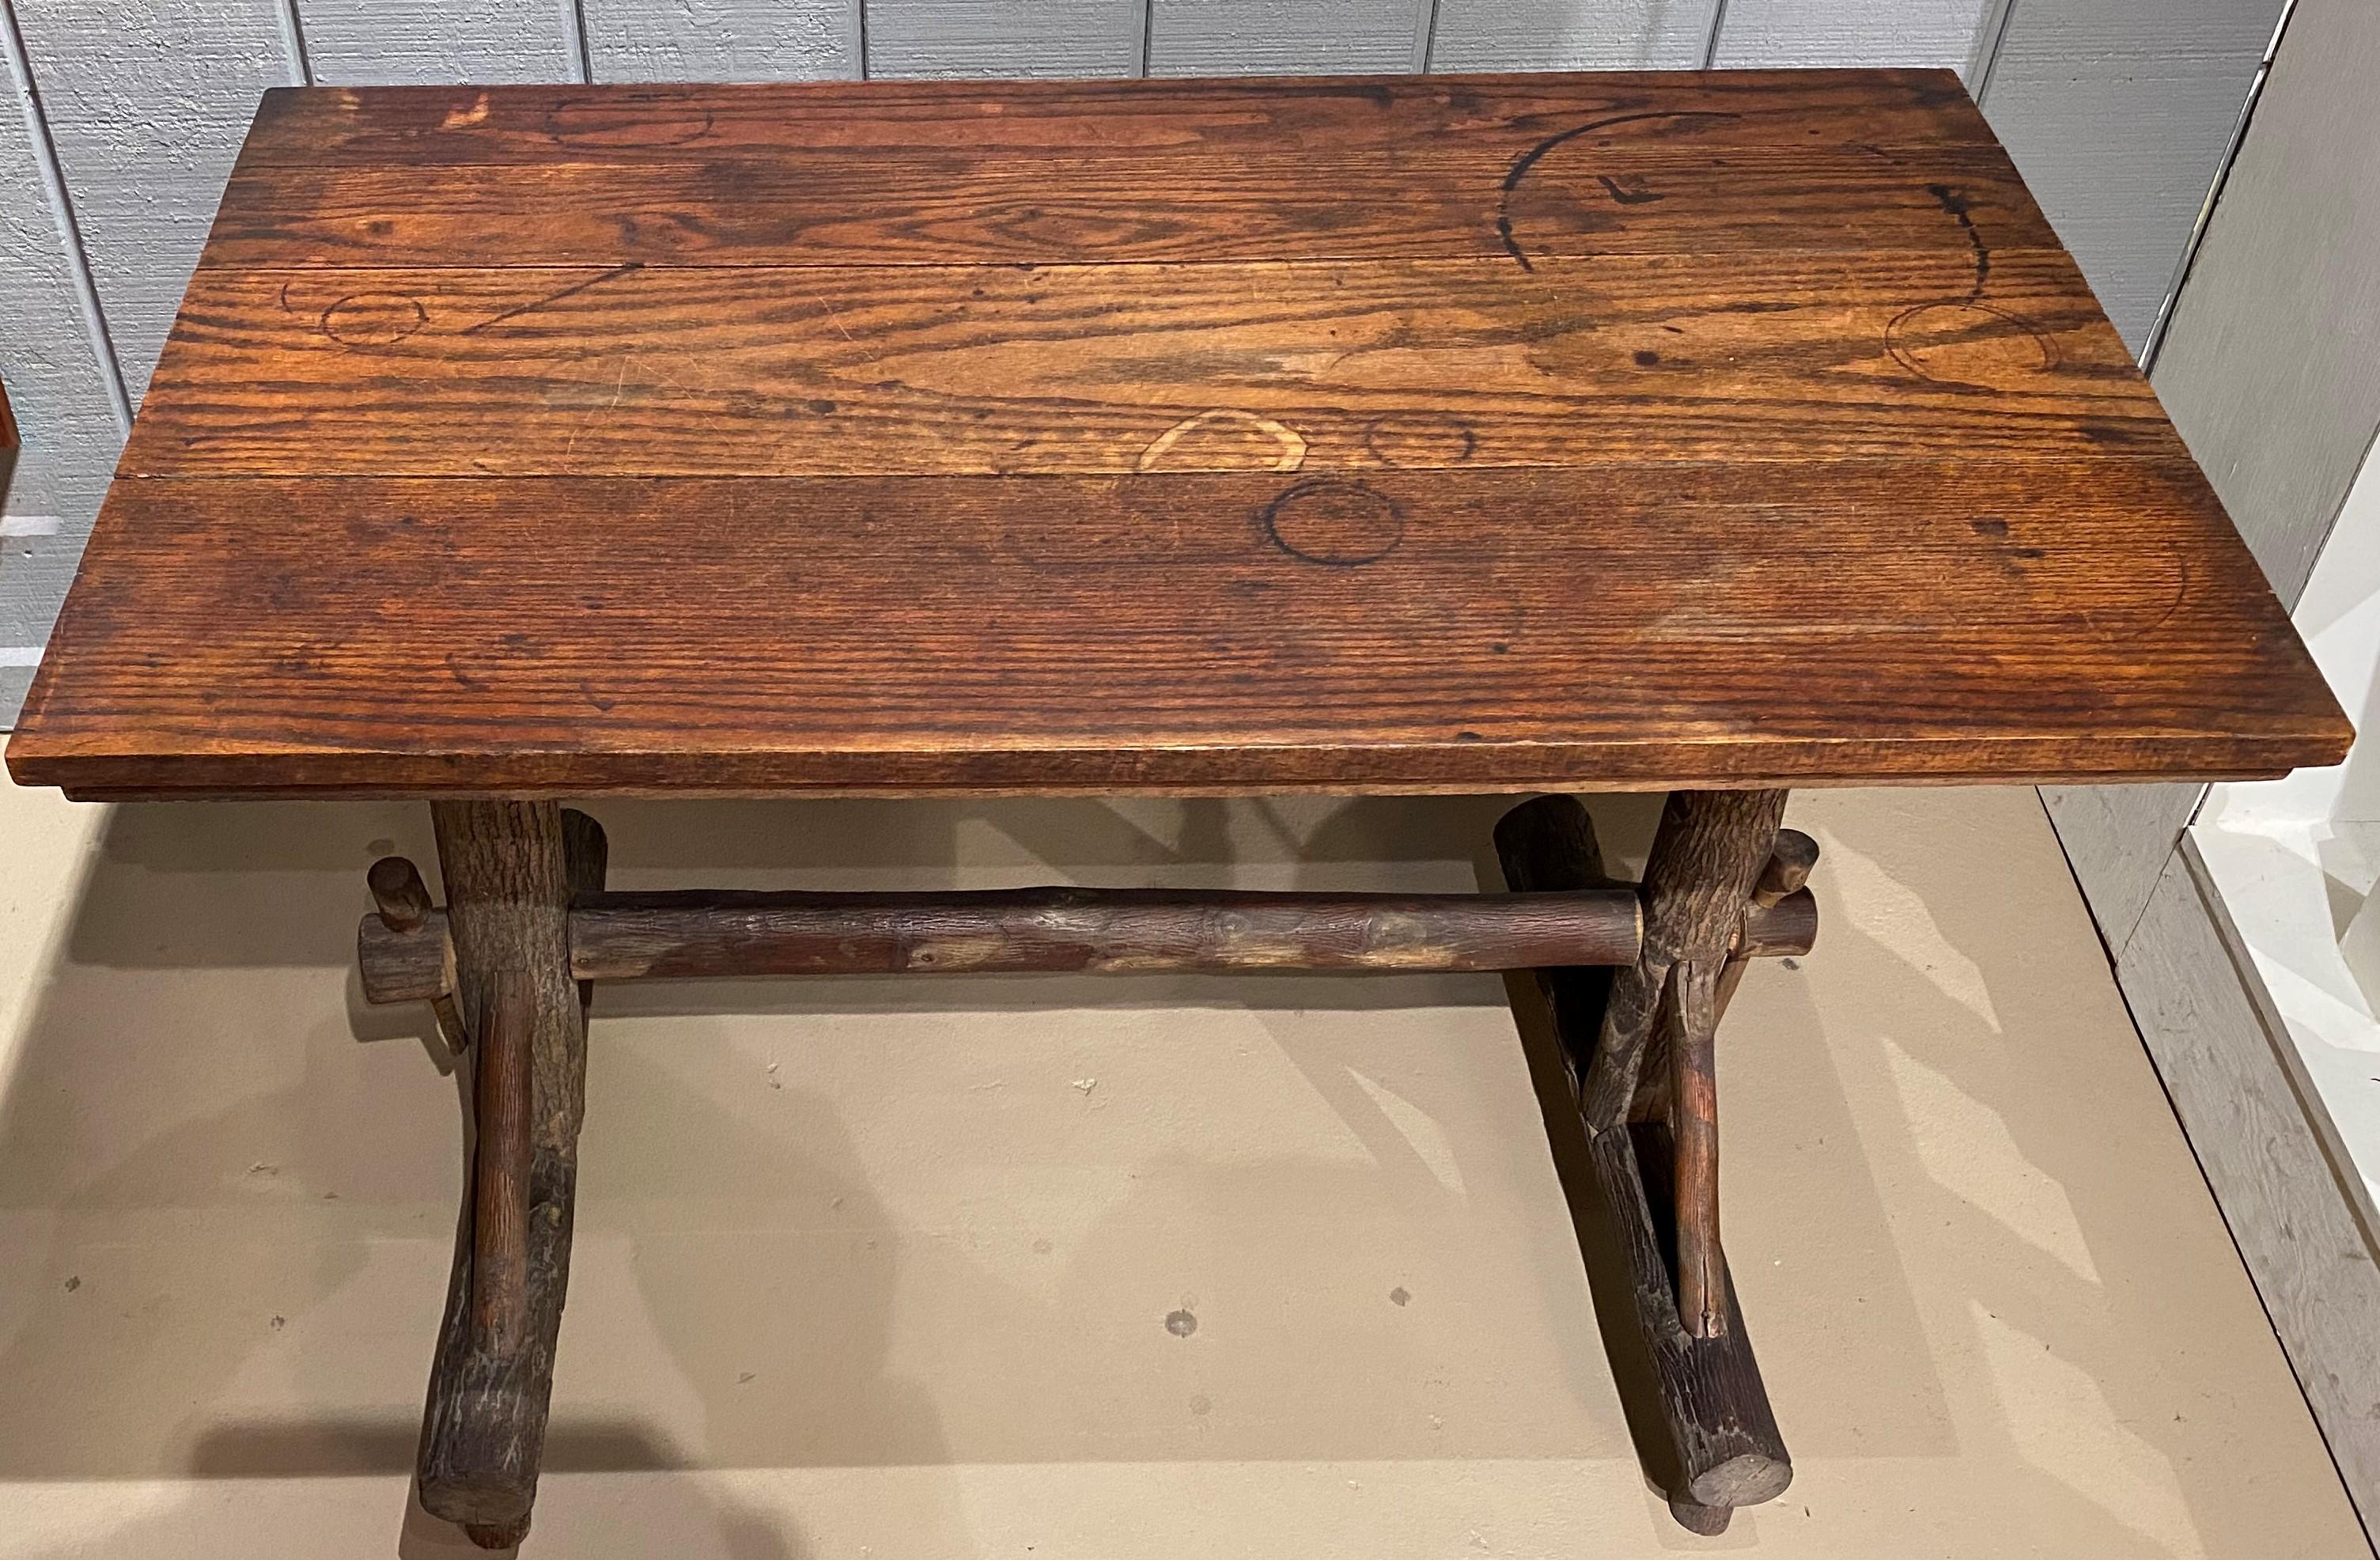 American Old Hickory Rustic Davenport Form Table with Two Matching Chairs, circa 1940s